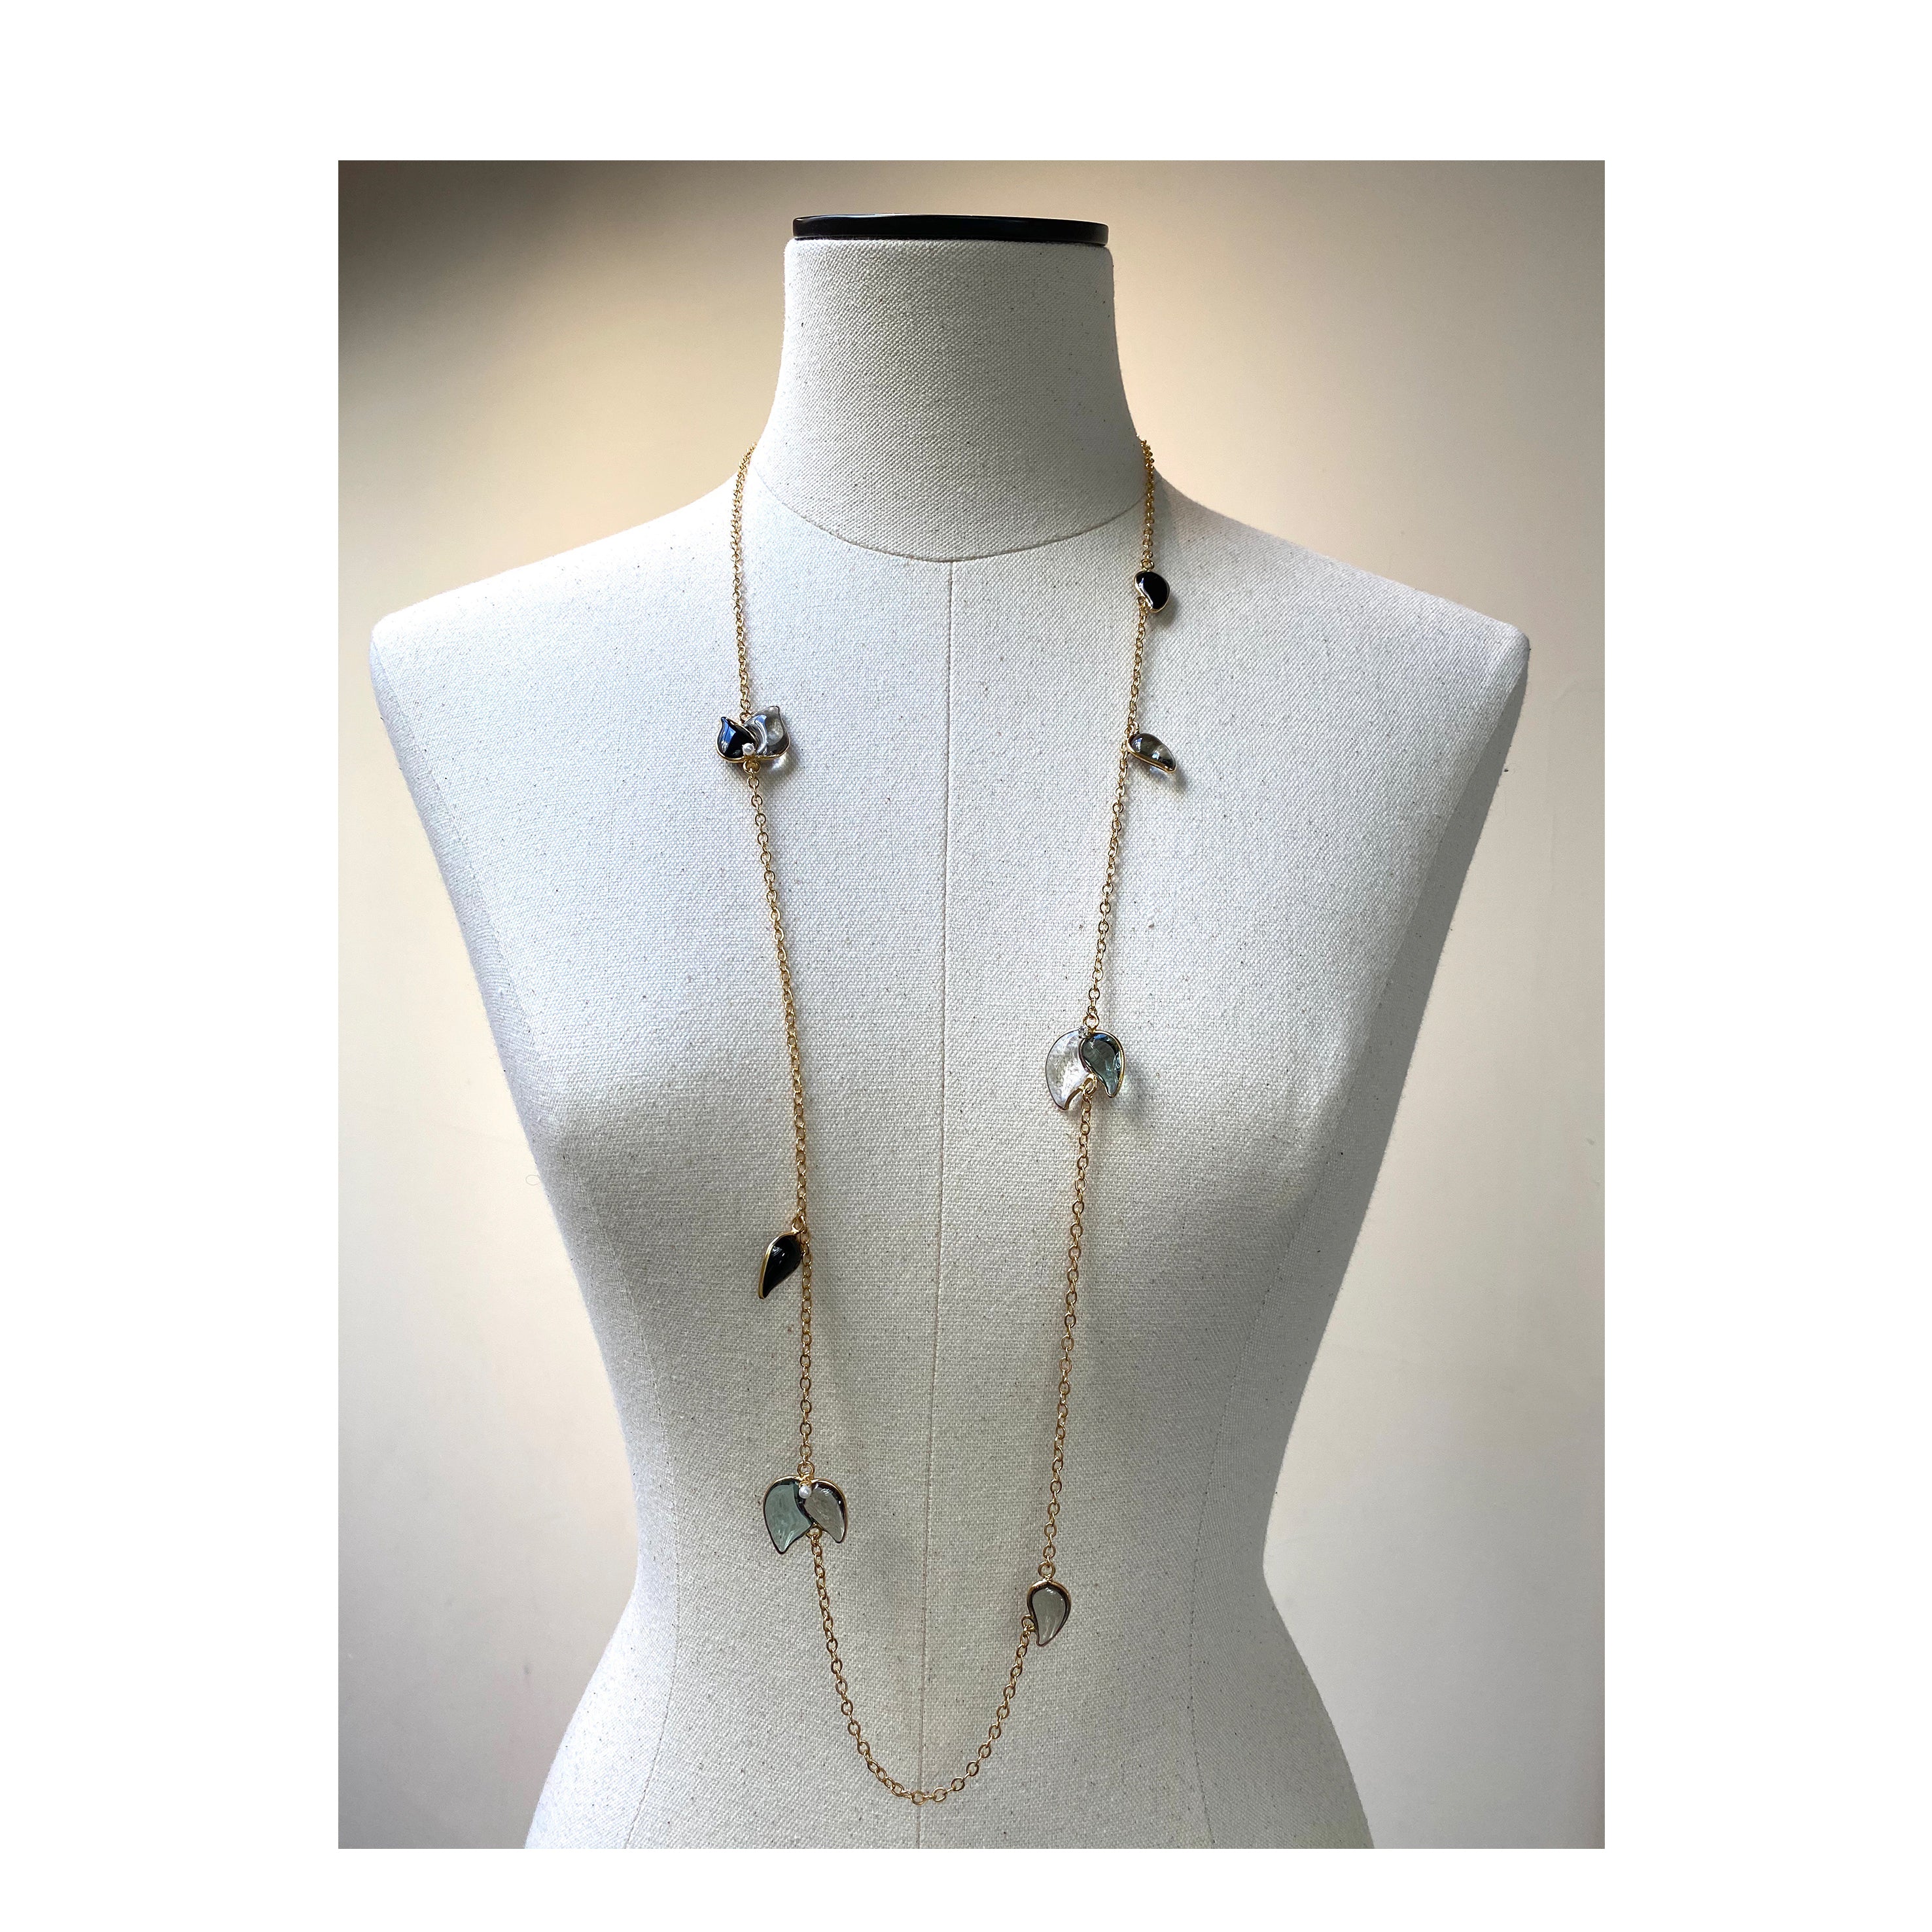 Seaflower long necklace